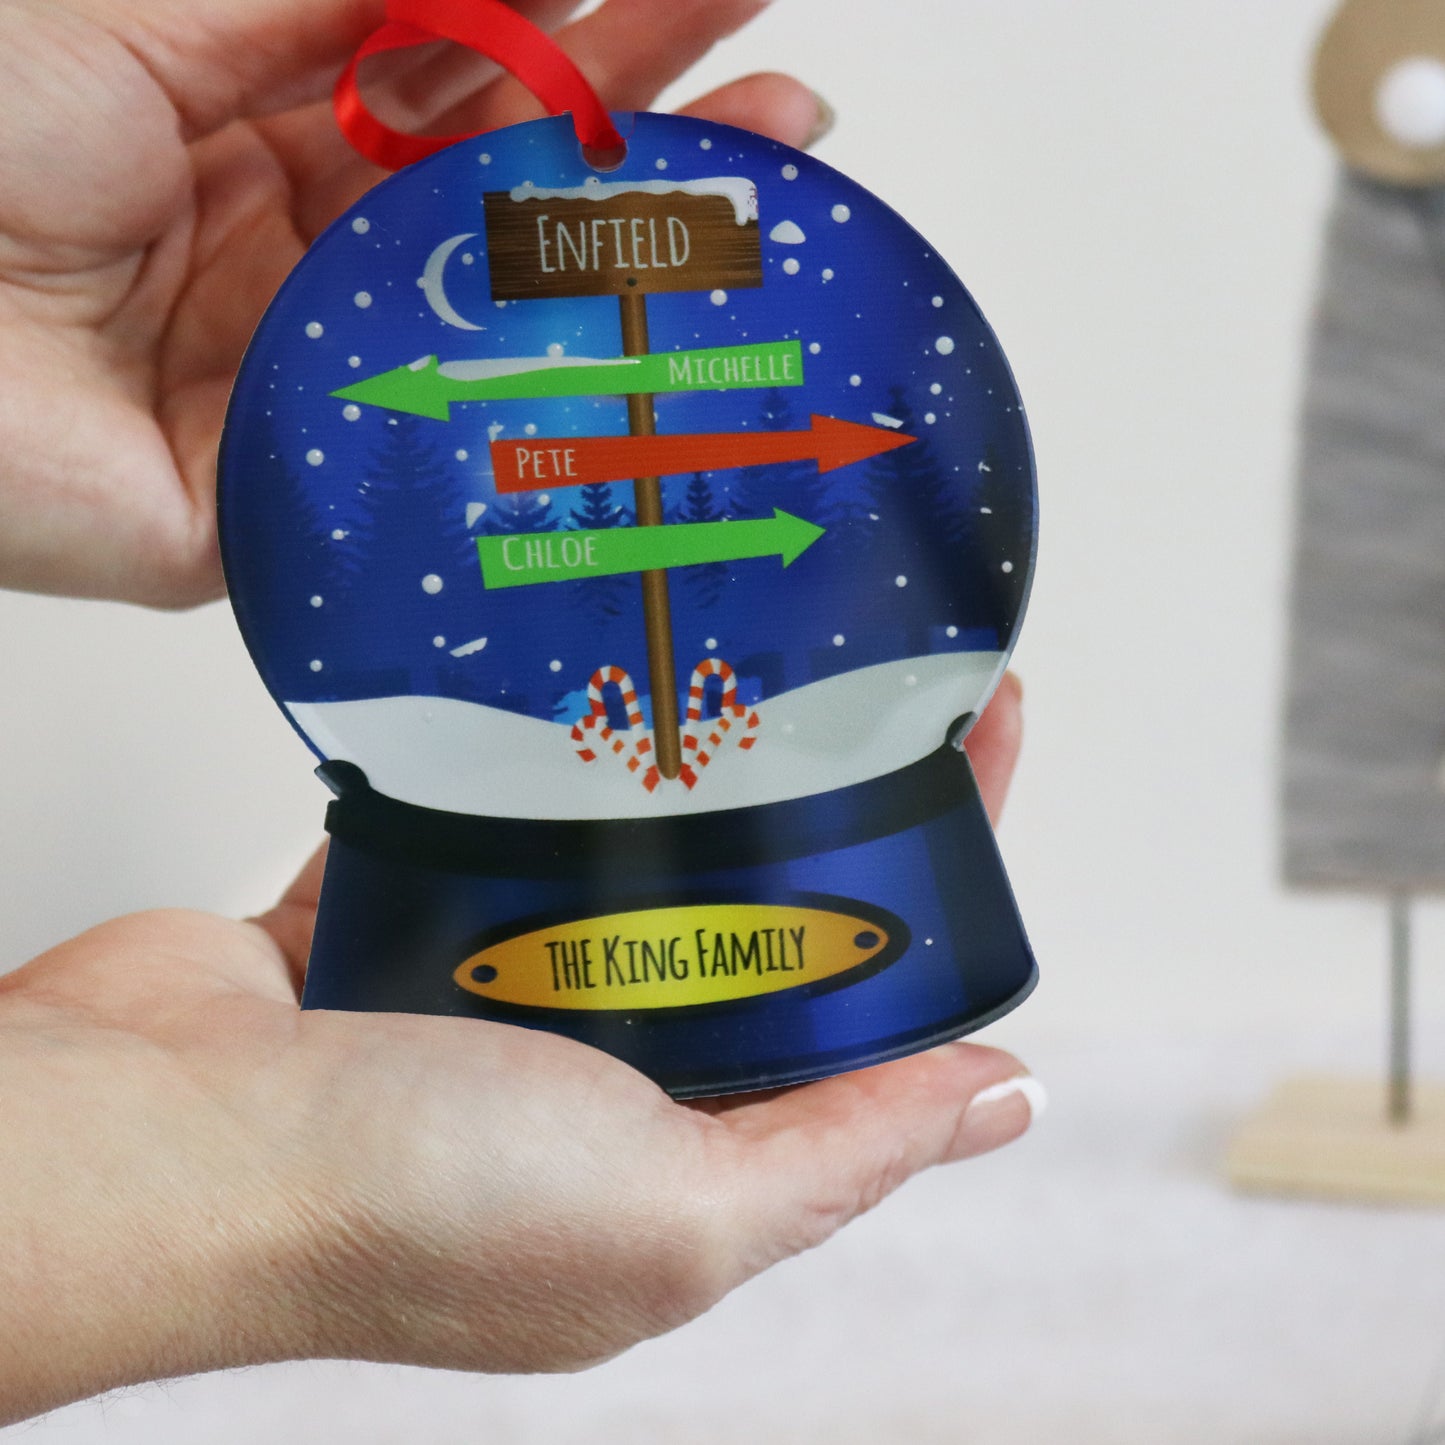 Personalised Family Snowglobe Bauble